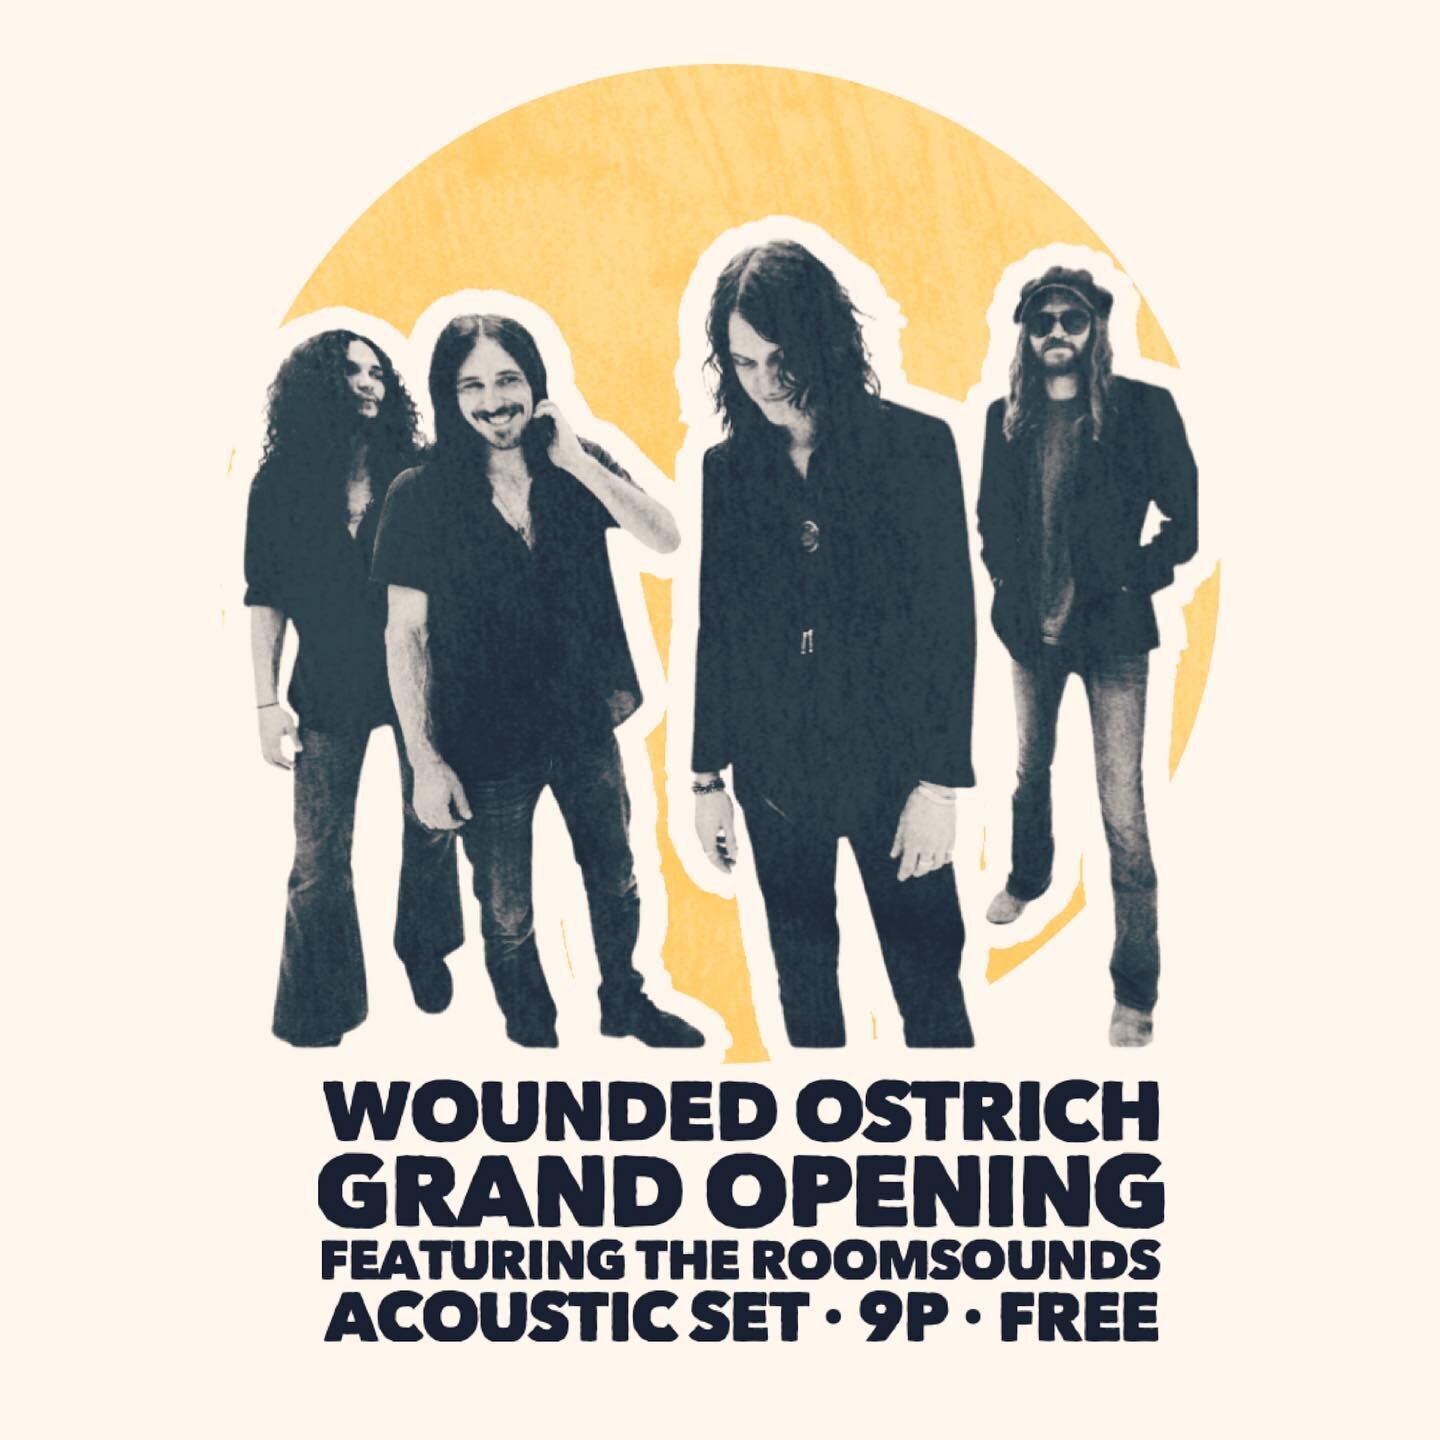 We&rsquo;re stoked to play the GRAND OPENING of Deep Ellum&rsquo;s coolest new bar @woundedostrich this Friday (8/12)! We&rsquo;ll be rocking out acoustic style starting at 9 PM! It&rsquo;s FREE so you can spend your hard earned cash on some more dra